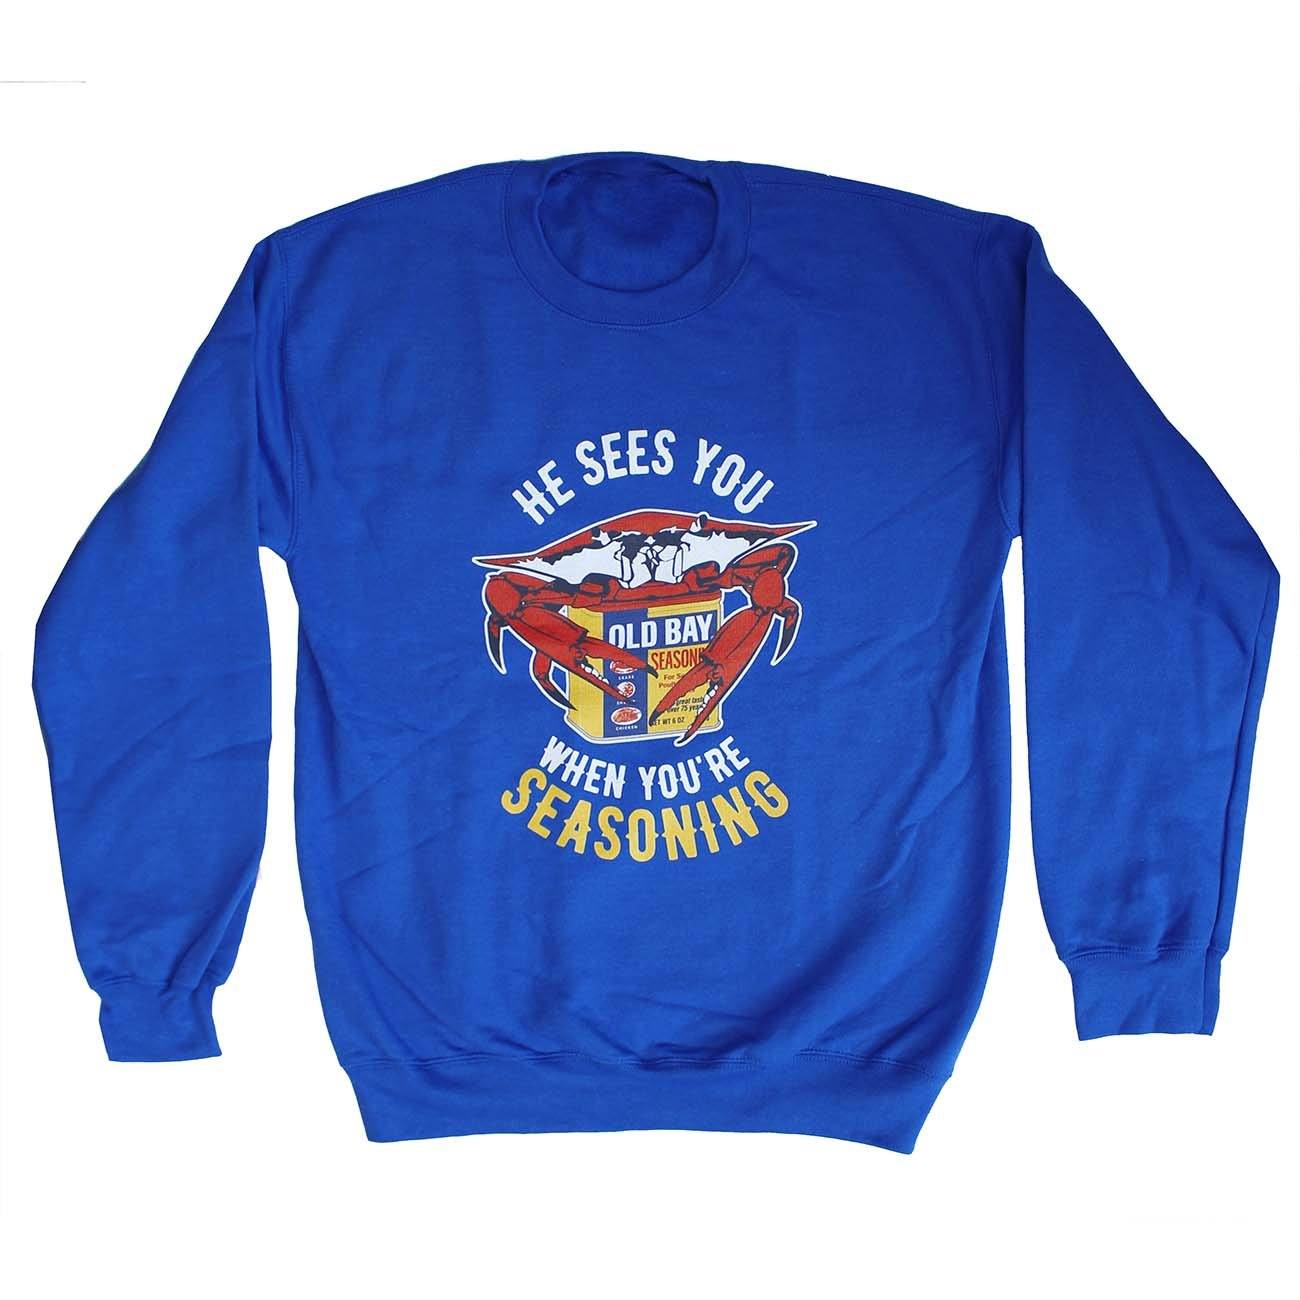 He Sees You When You're Seasoning (Royal Blue) / Crew Sweatshirt - Route One Apparel